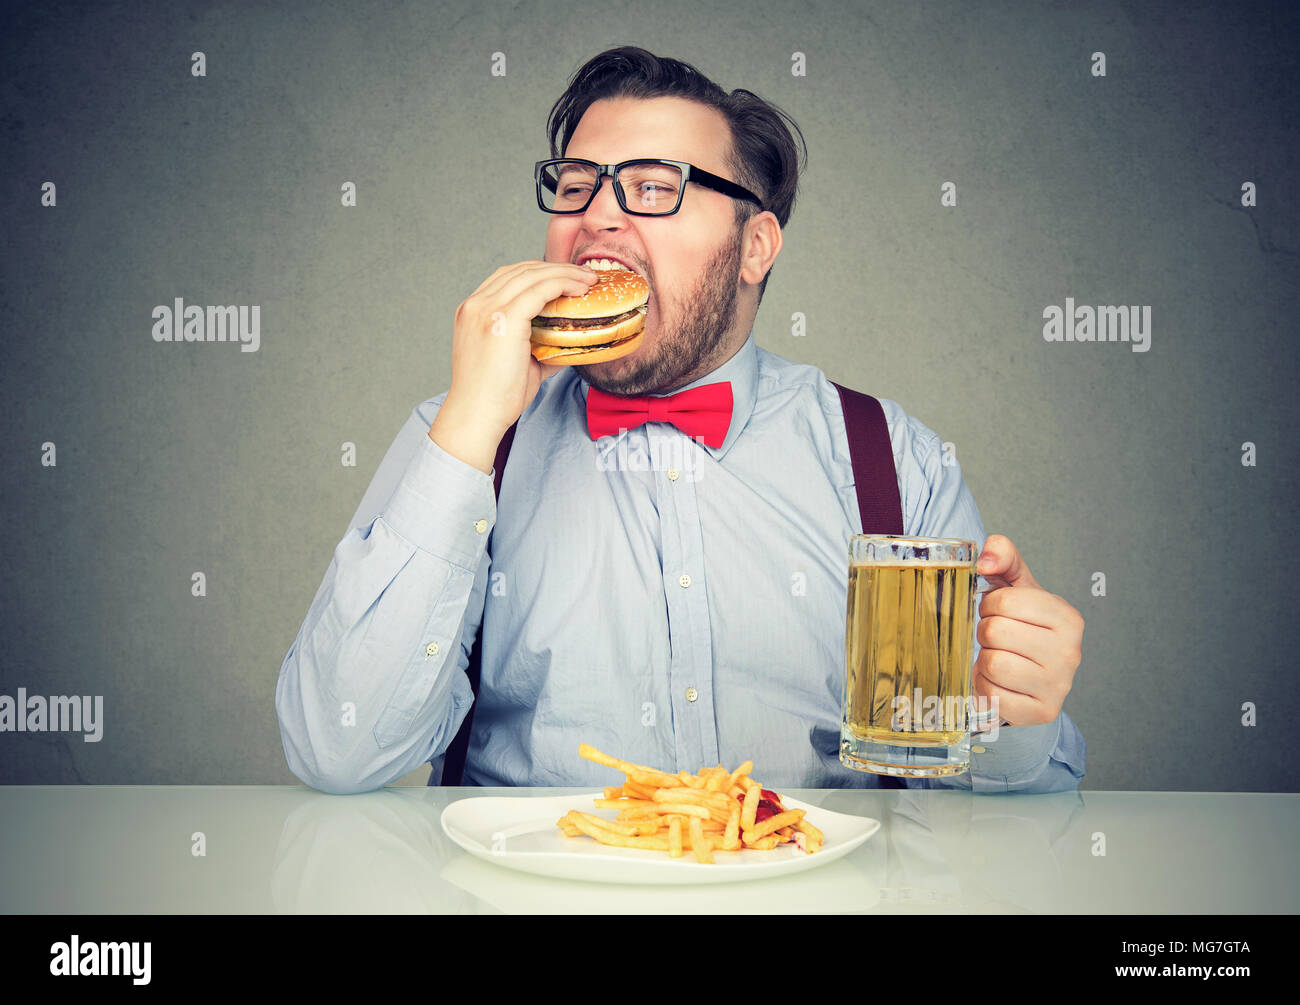 Business man eating junk food drinking beer Stock Photo